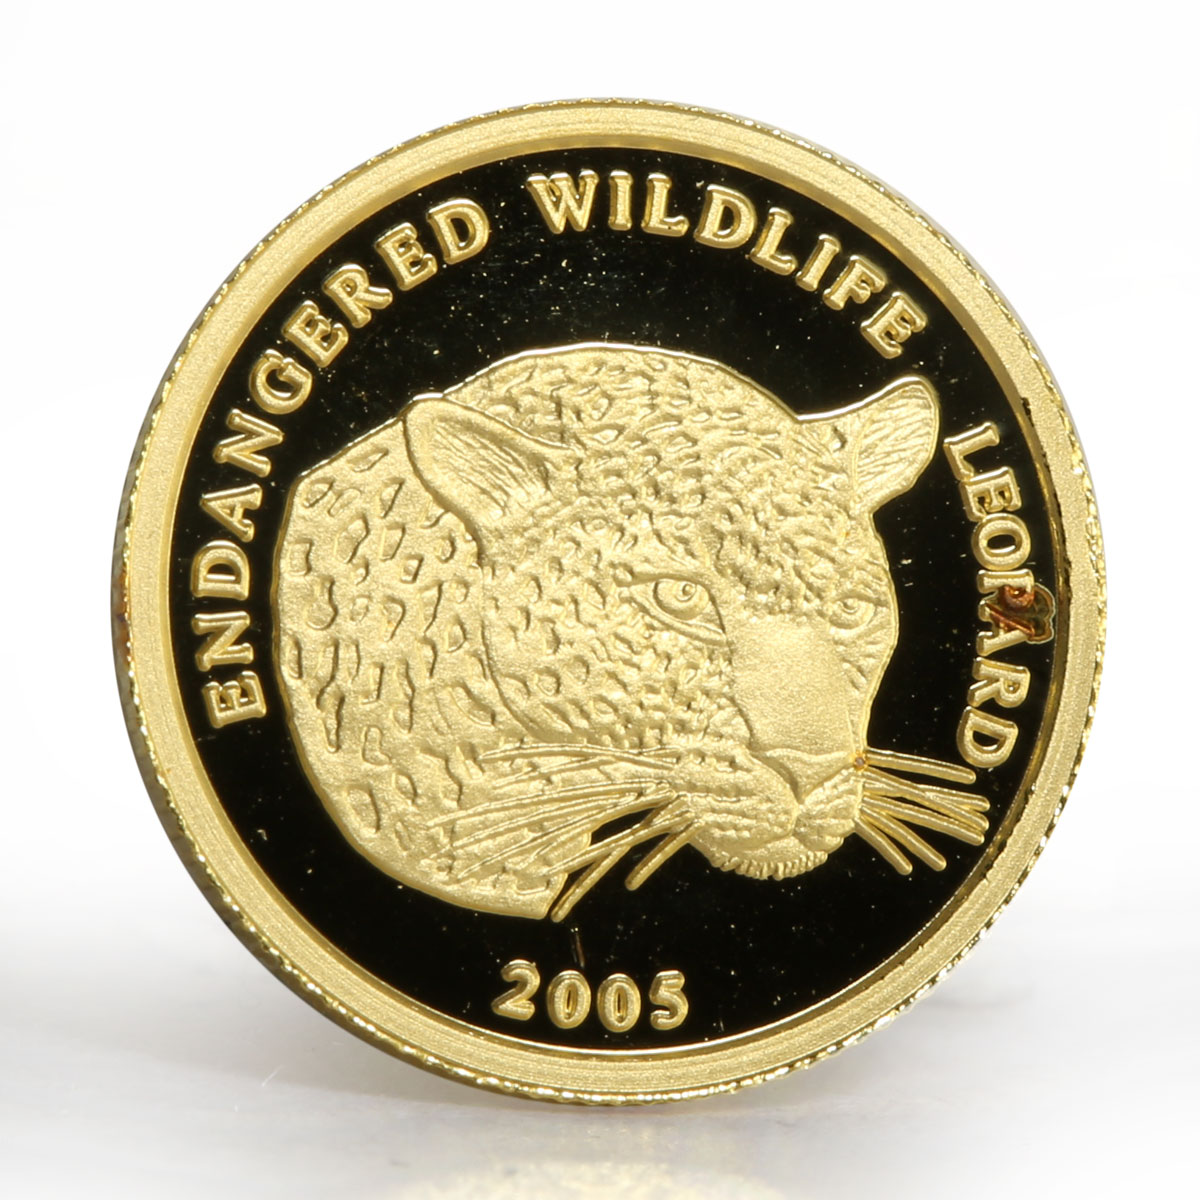 Benin 1500 francs Endangered Wildlife series The Leopard proof gold coin 2005